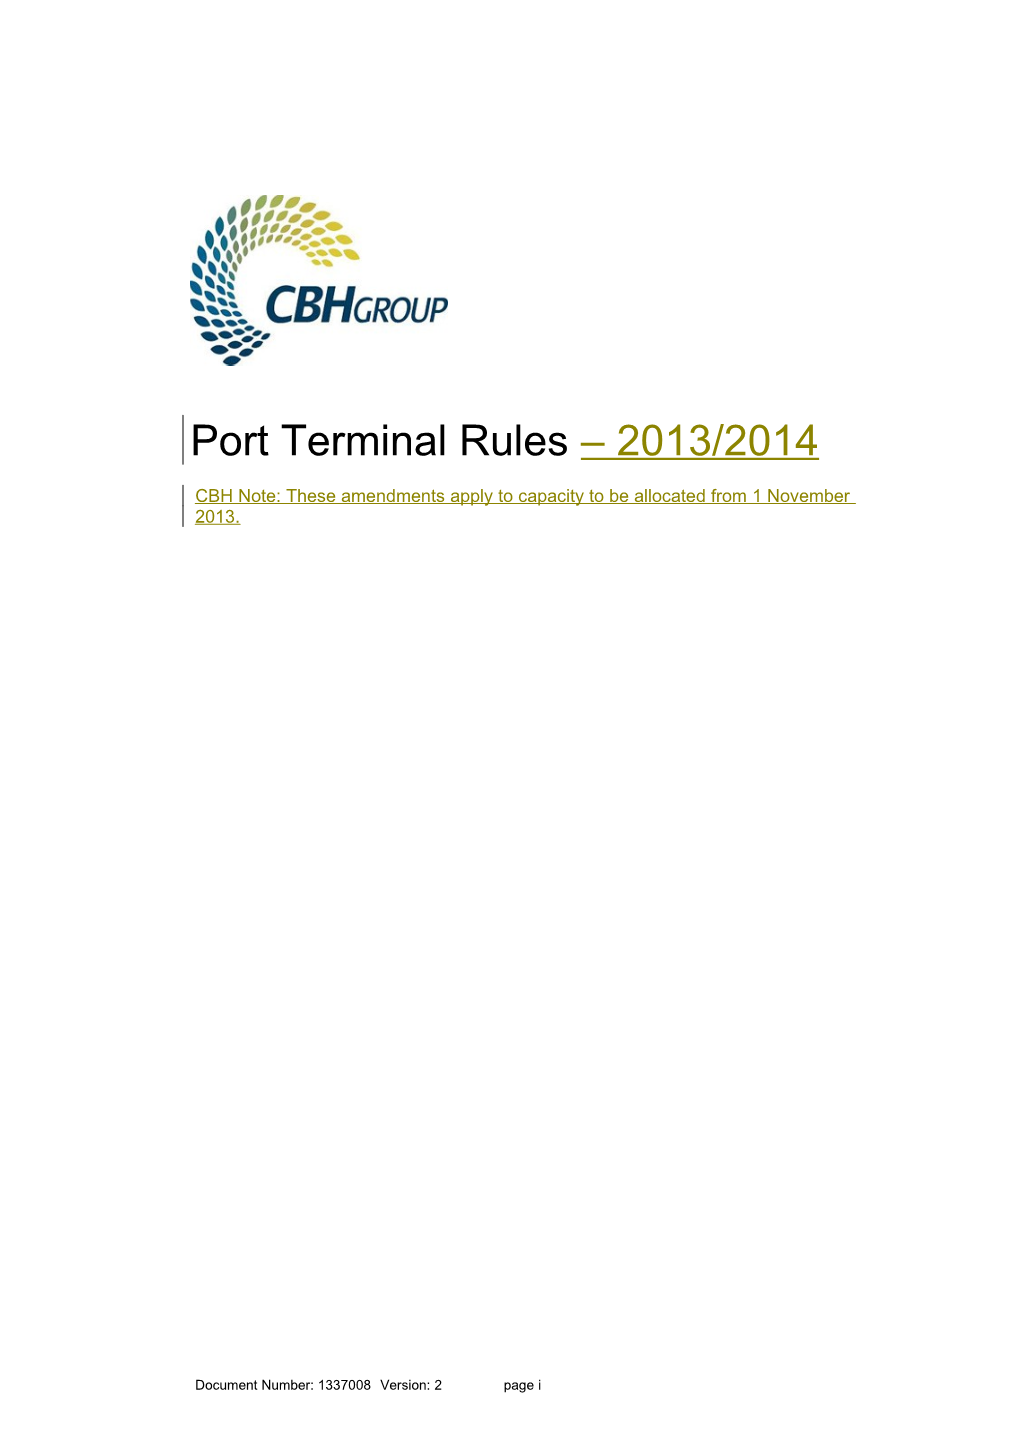 CBH Revised Port Terminal Rules